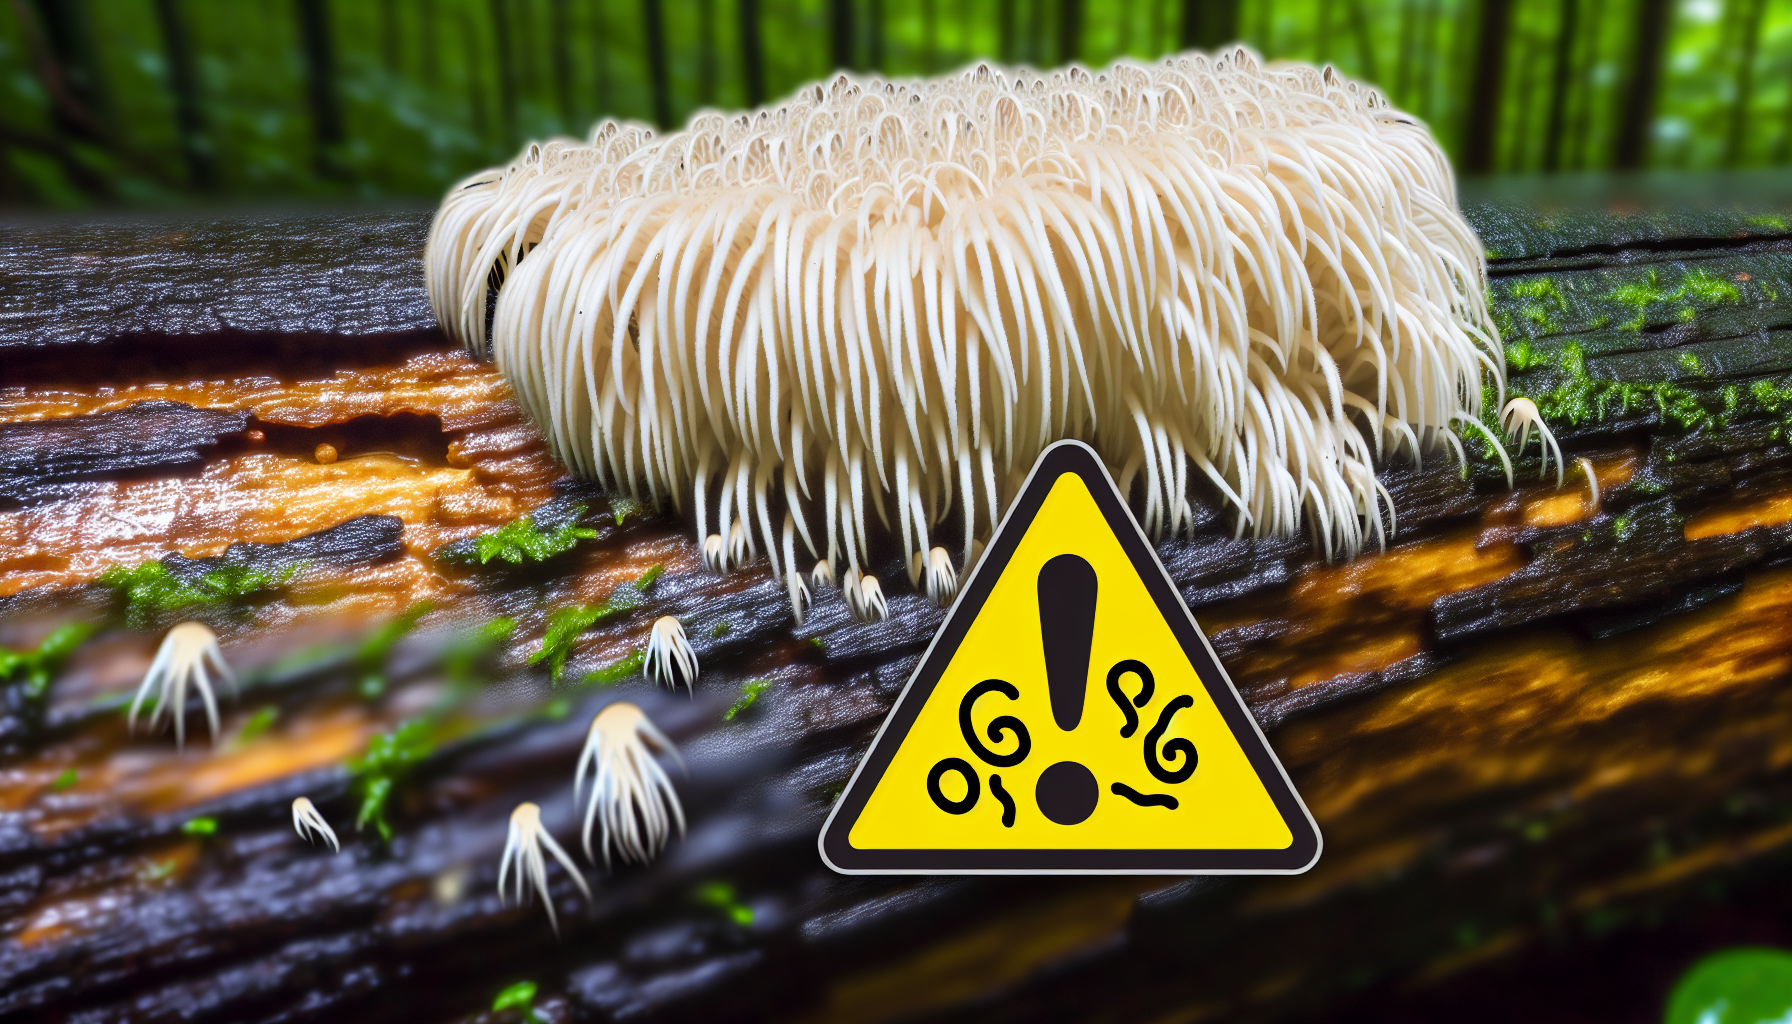 Precautions and Interactions - Lion's mane mushroom with warning sign